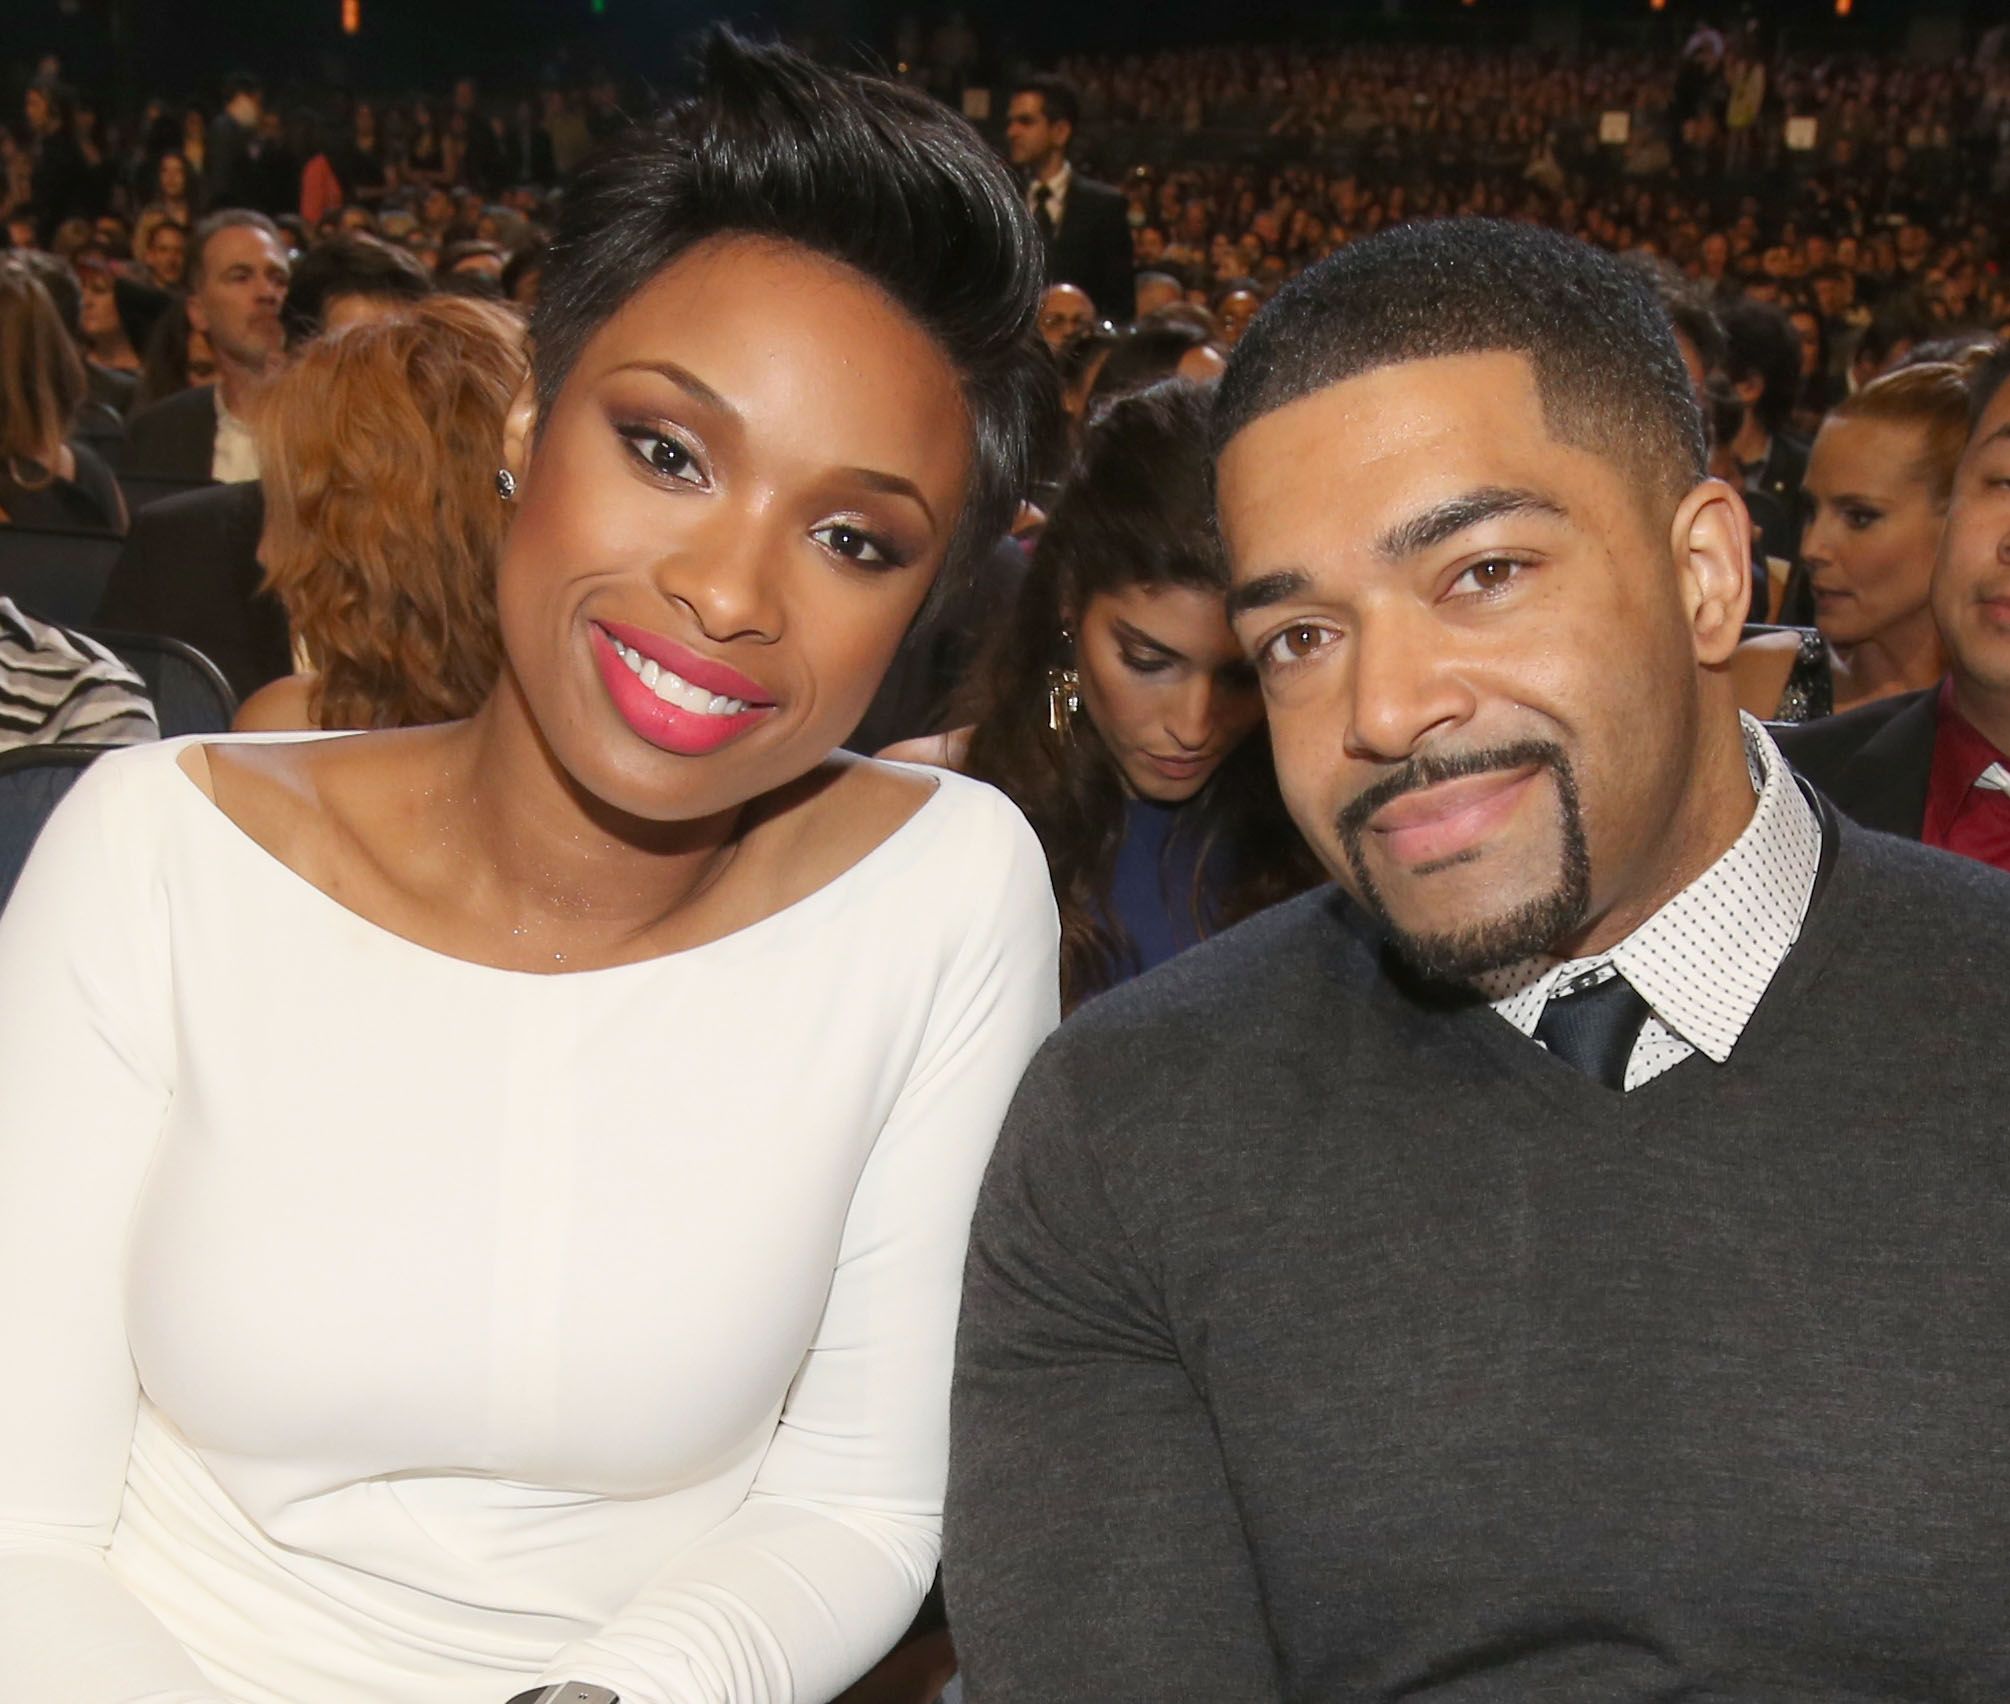 Jennifer Hudson and David Otunga attend the 40th Annual People's Choice Awards on January 8, 2014 | Photo: Getty Images.